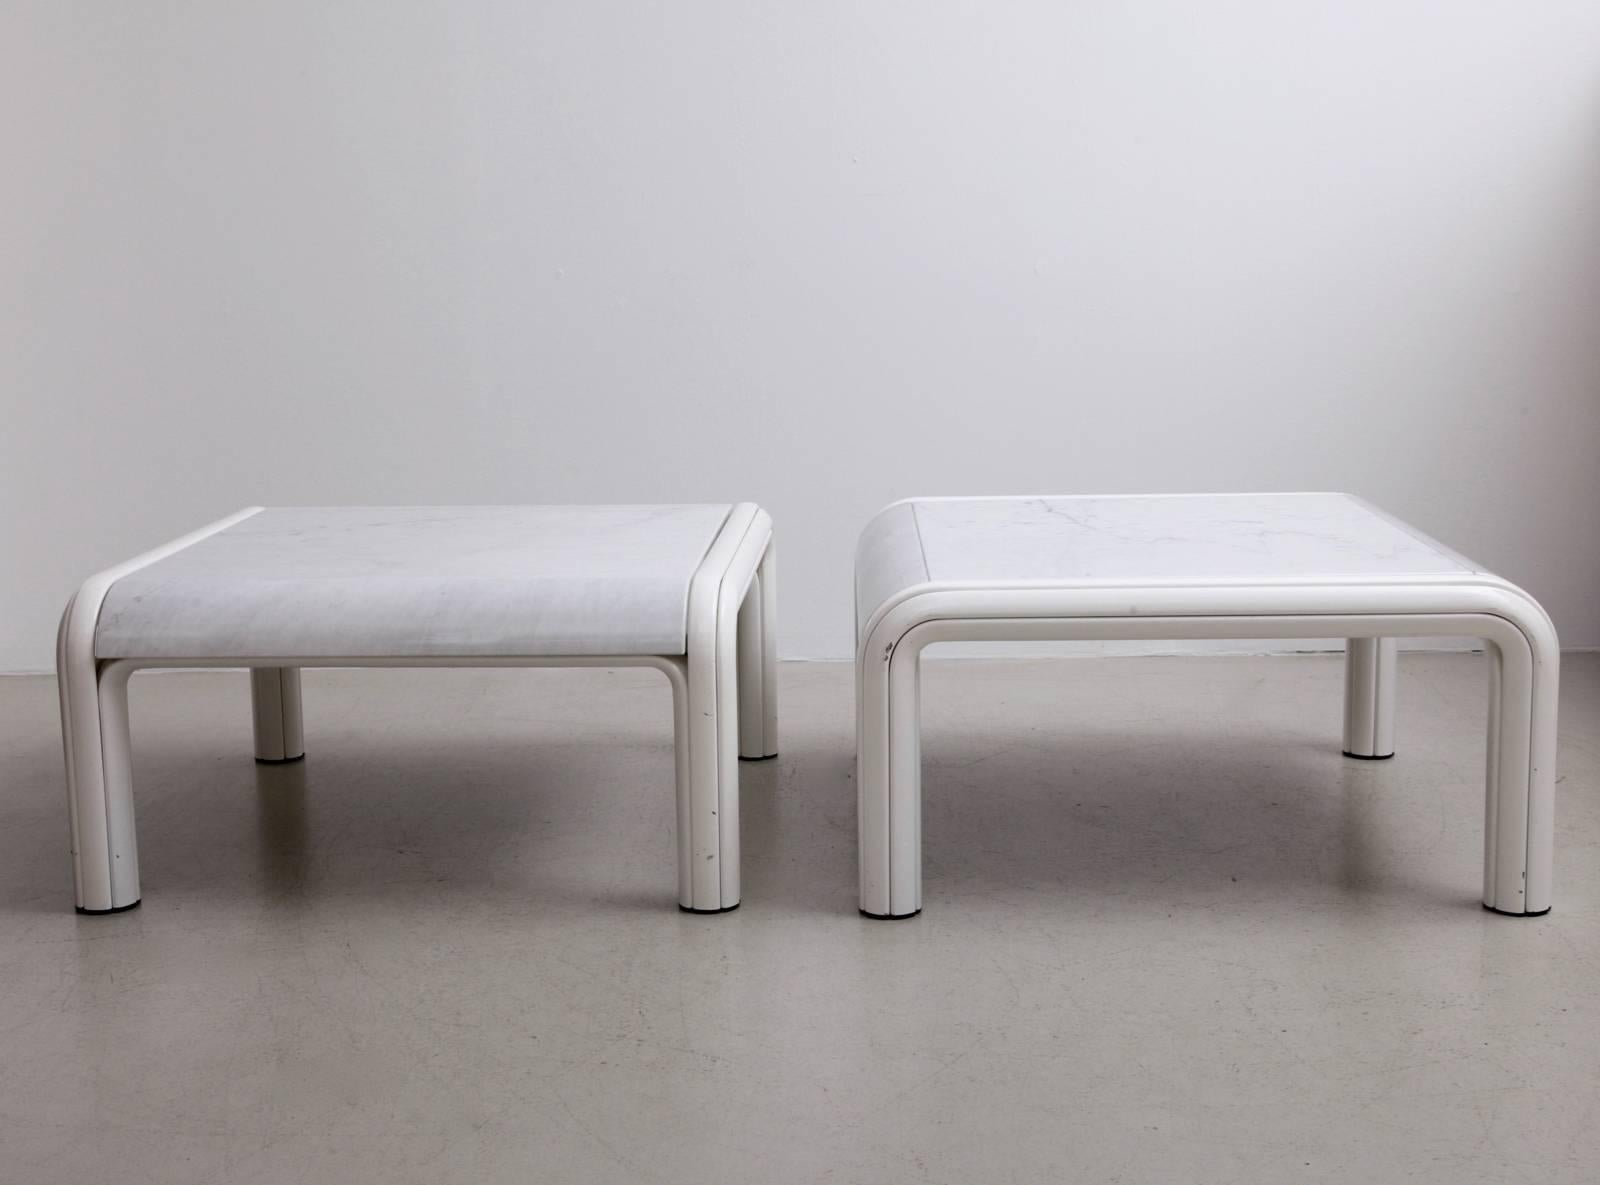 Set of two coffee or sofa tables by Gae Aulenti for Knoll from the 1970s. Rare version with white marble table top! Very good condition with some lacquer chips on the base.

